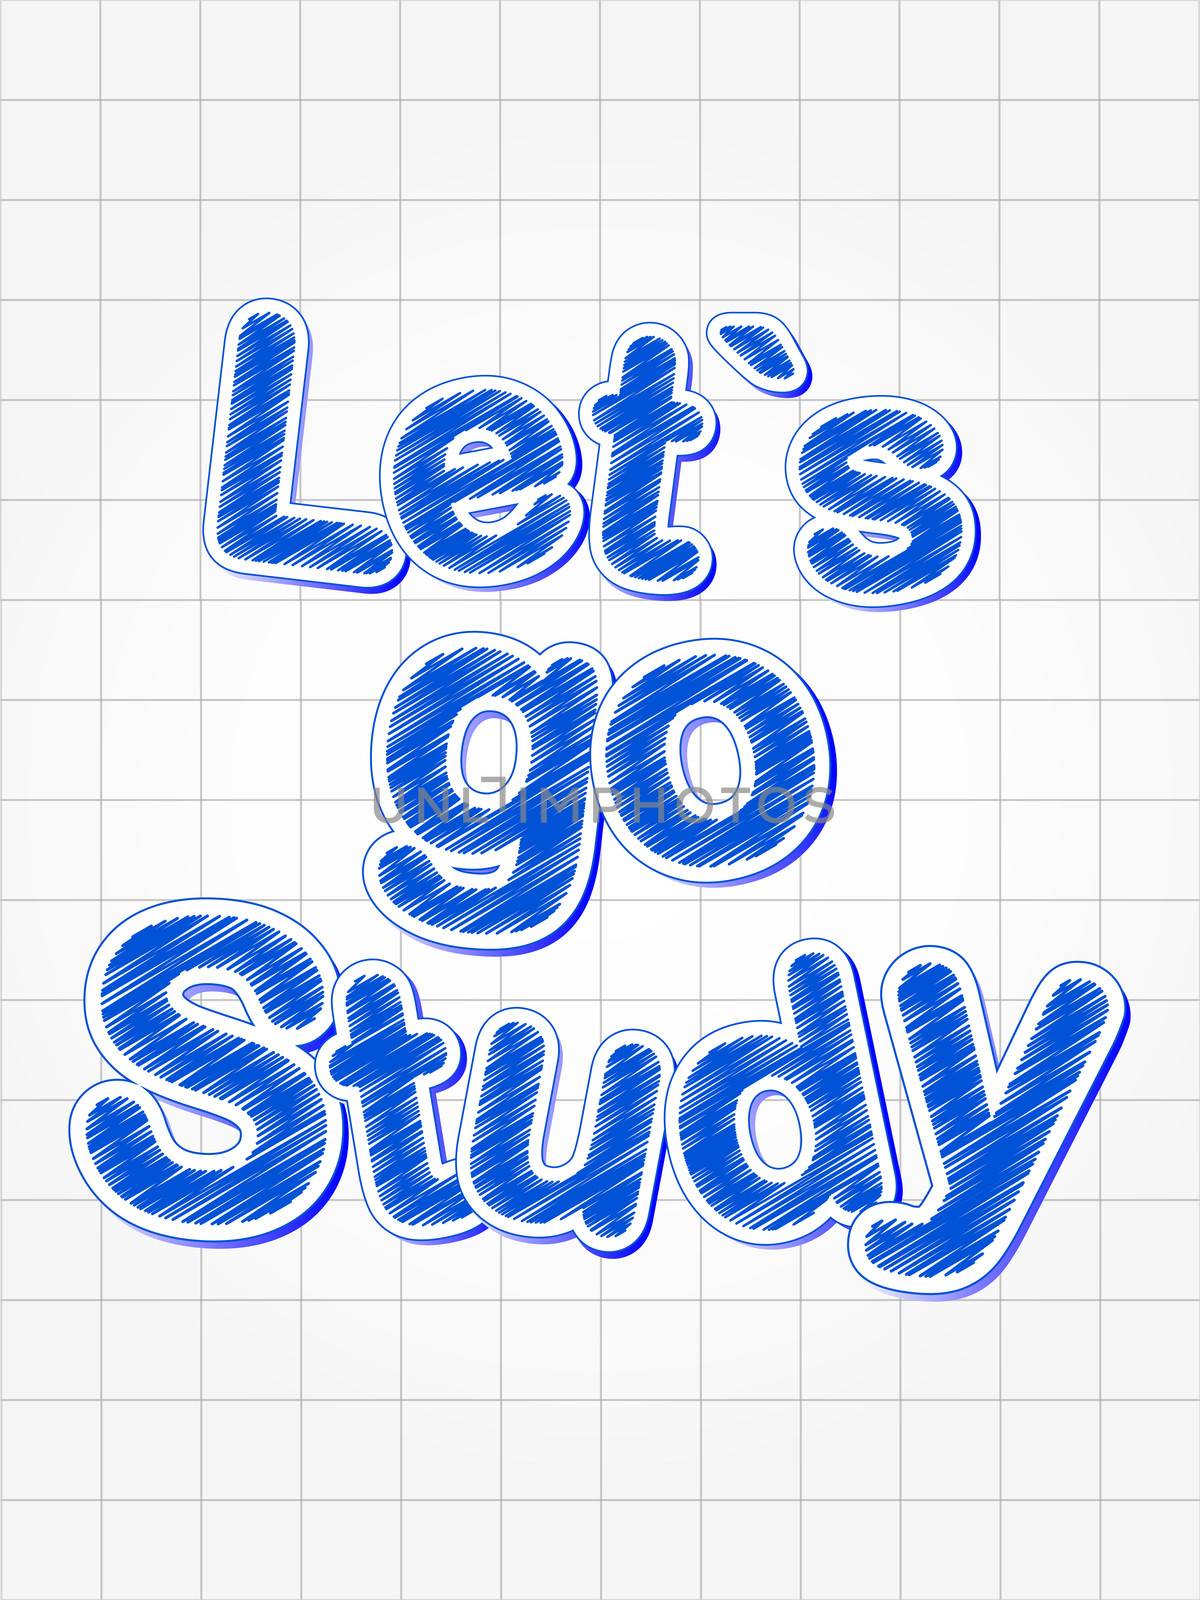 let's go study in blue over squared sheet by marinini